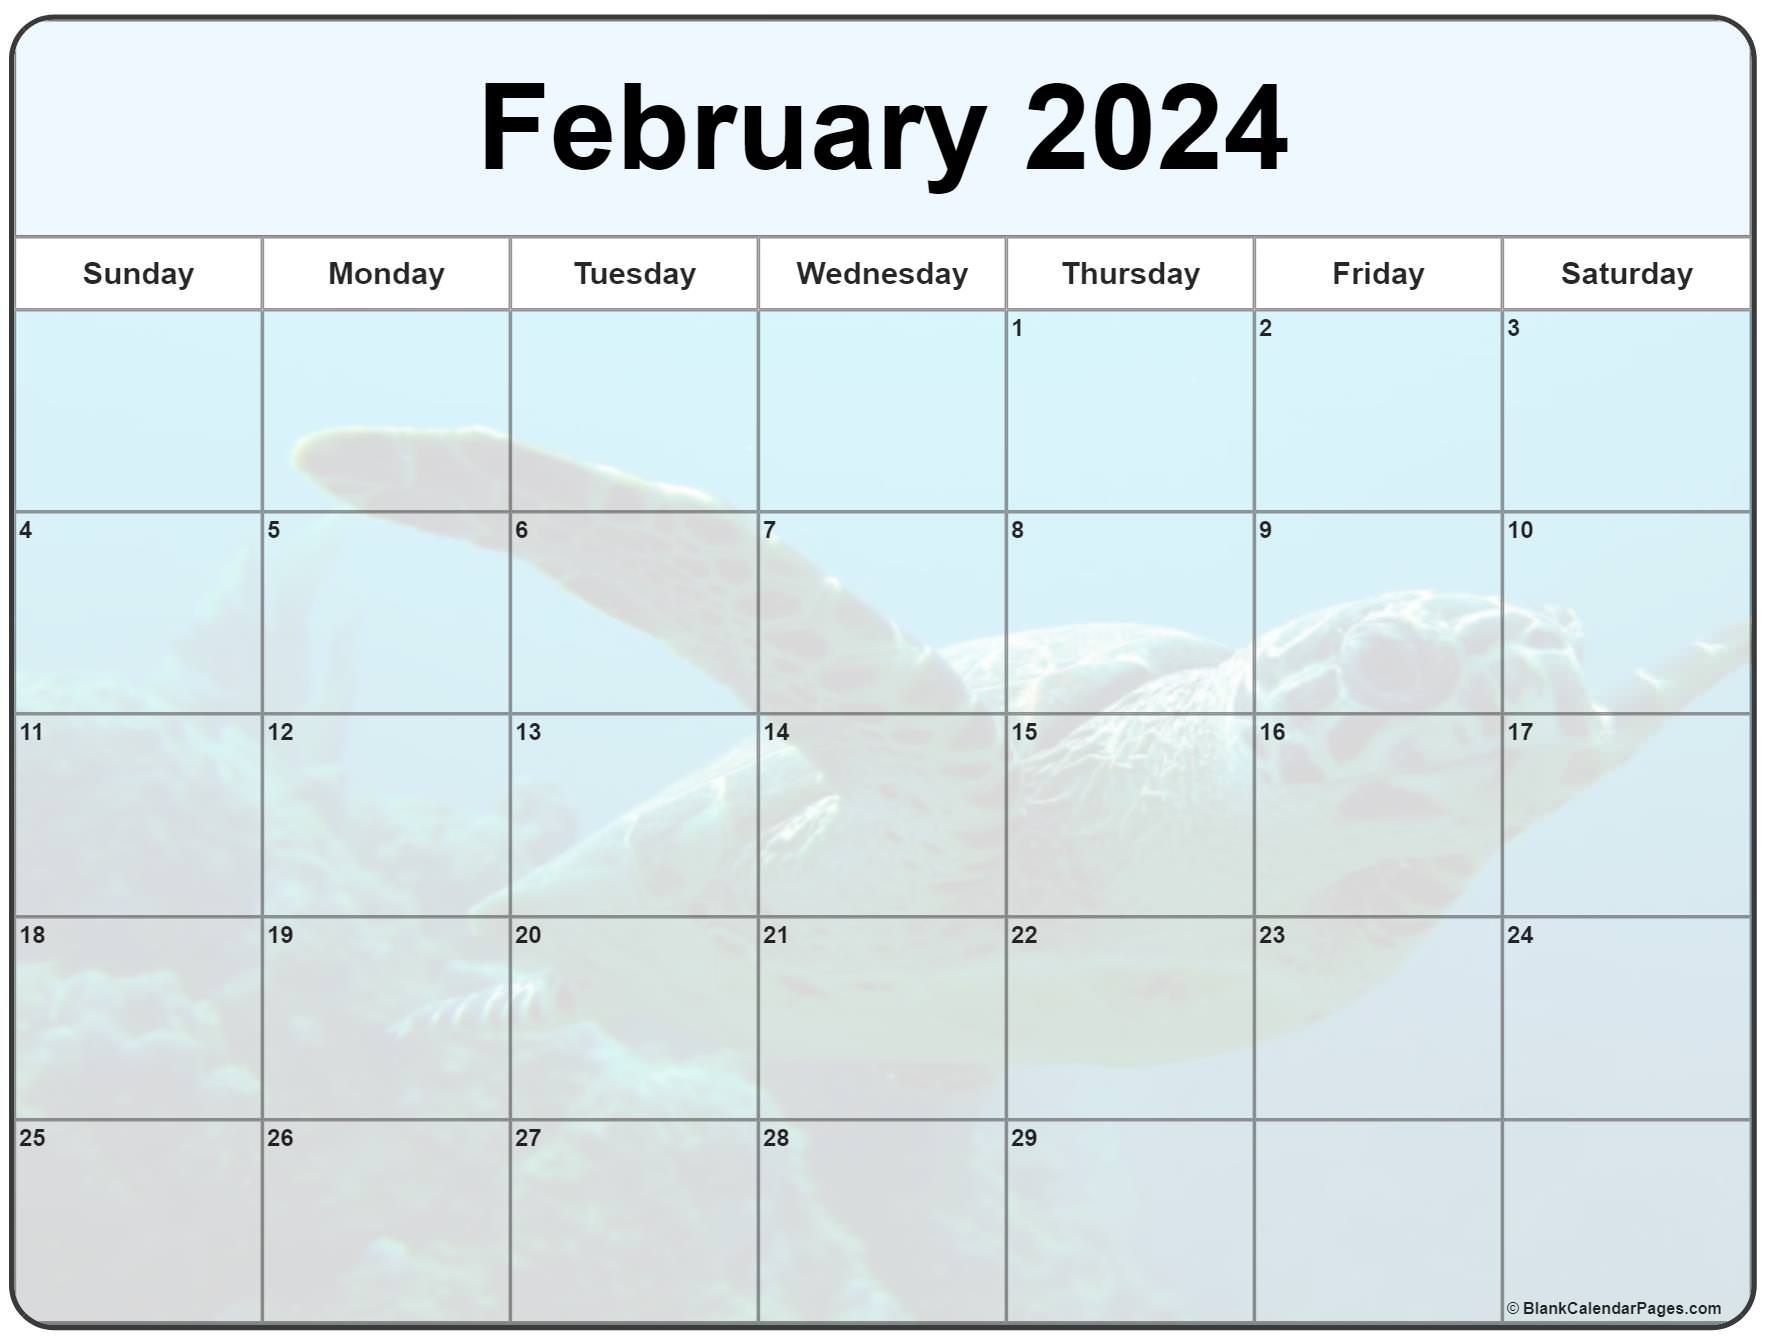 Collection Of February 2023 Photo Calendars With Image Filters.